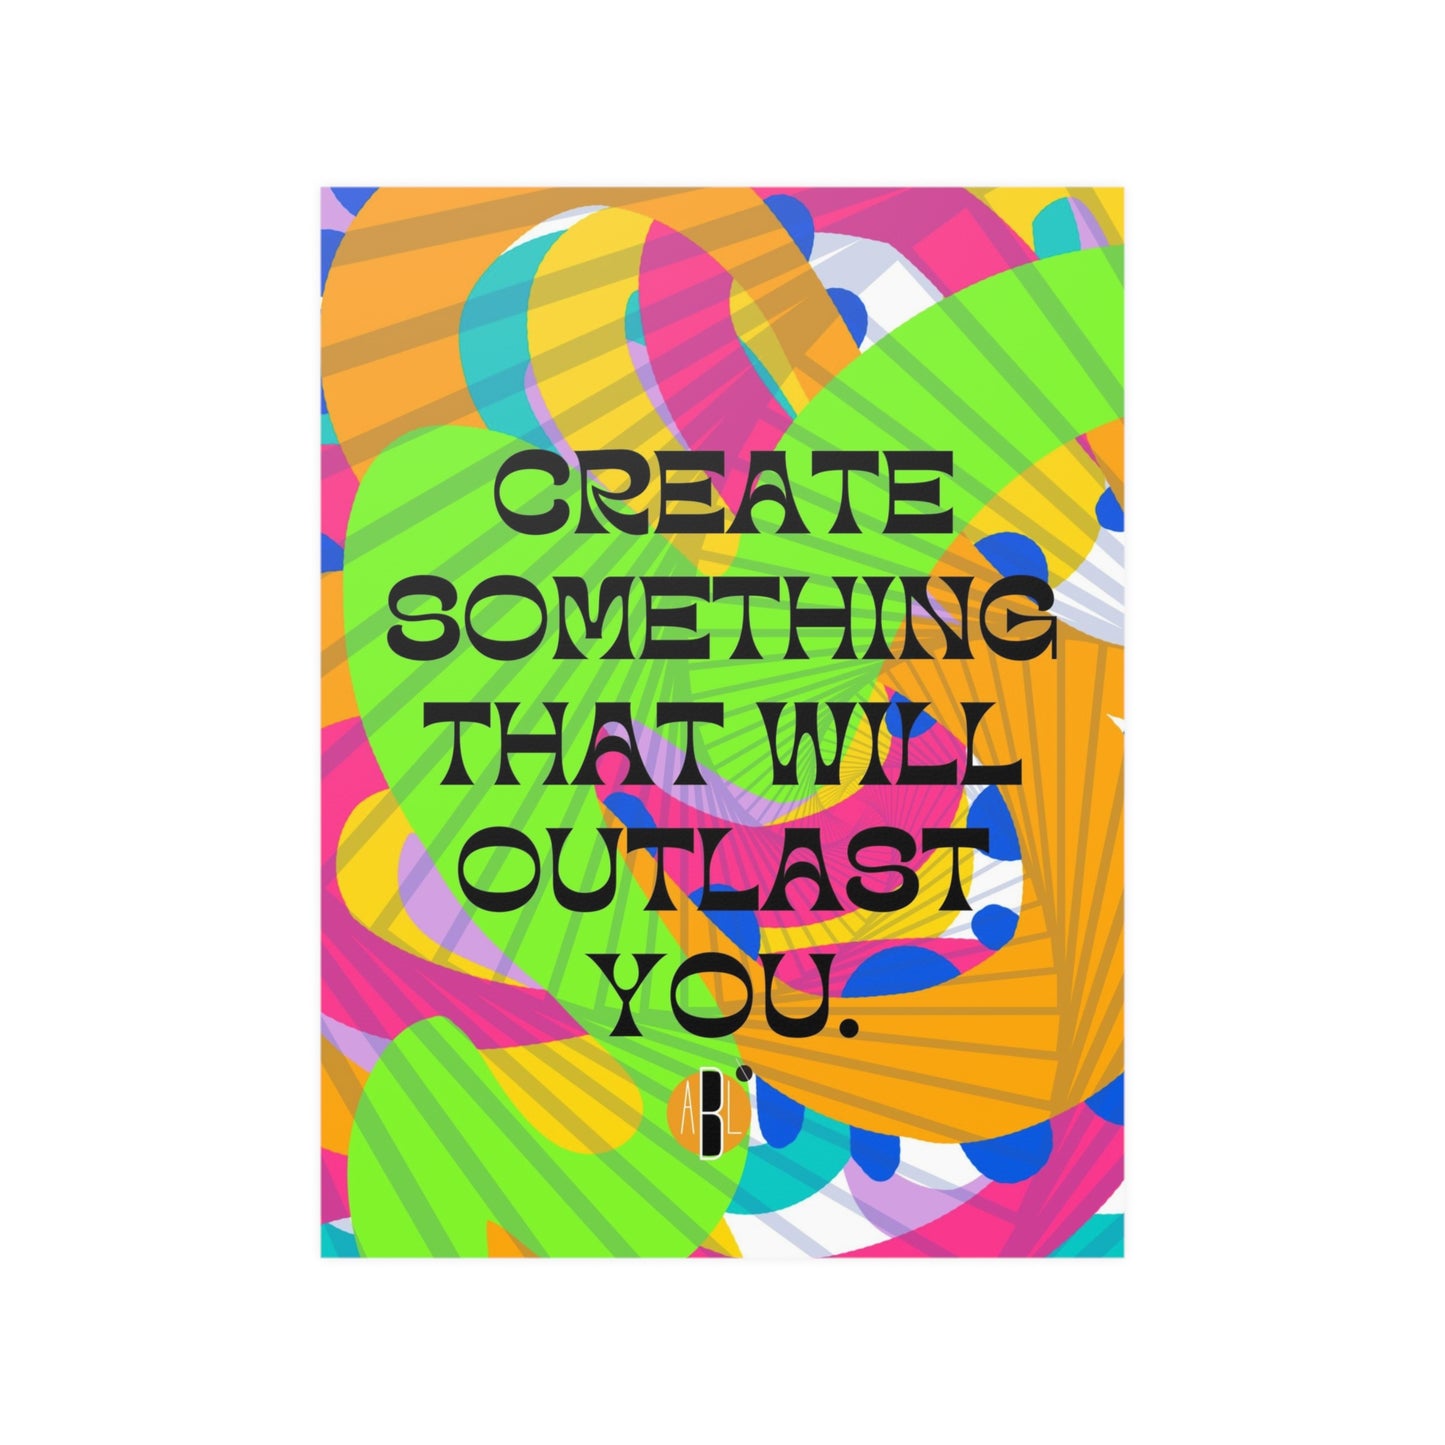 ABL Inspirational Poster: " Create Something..."